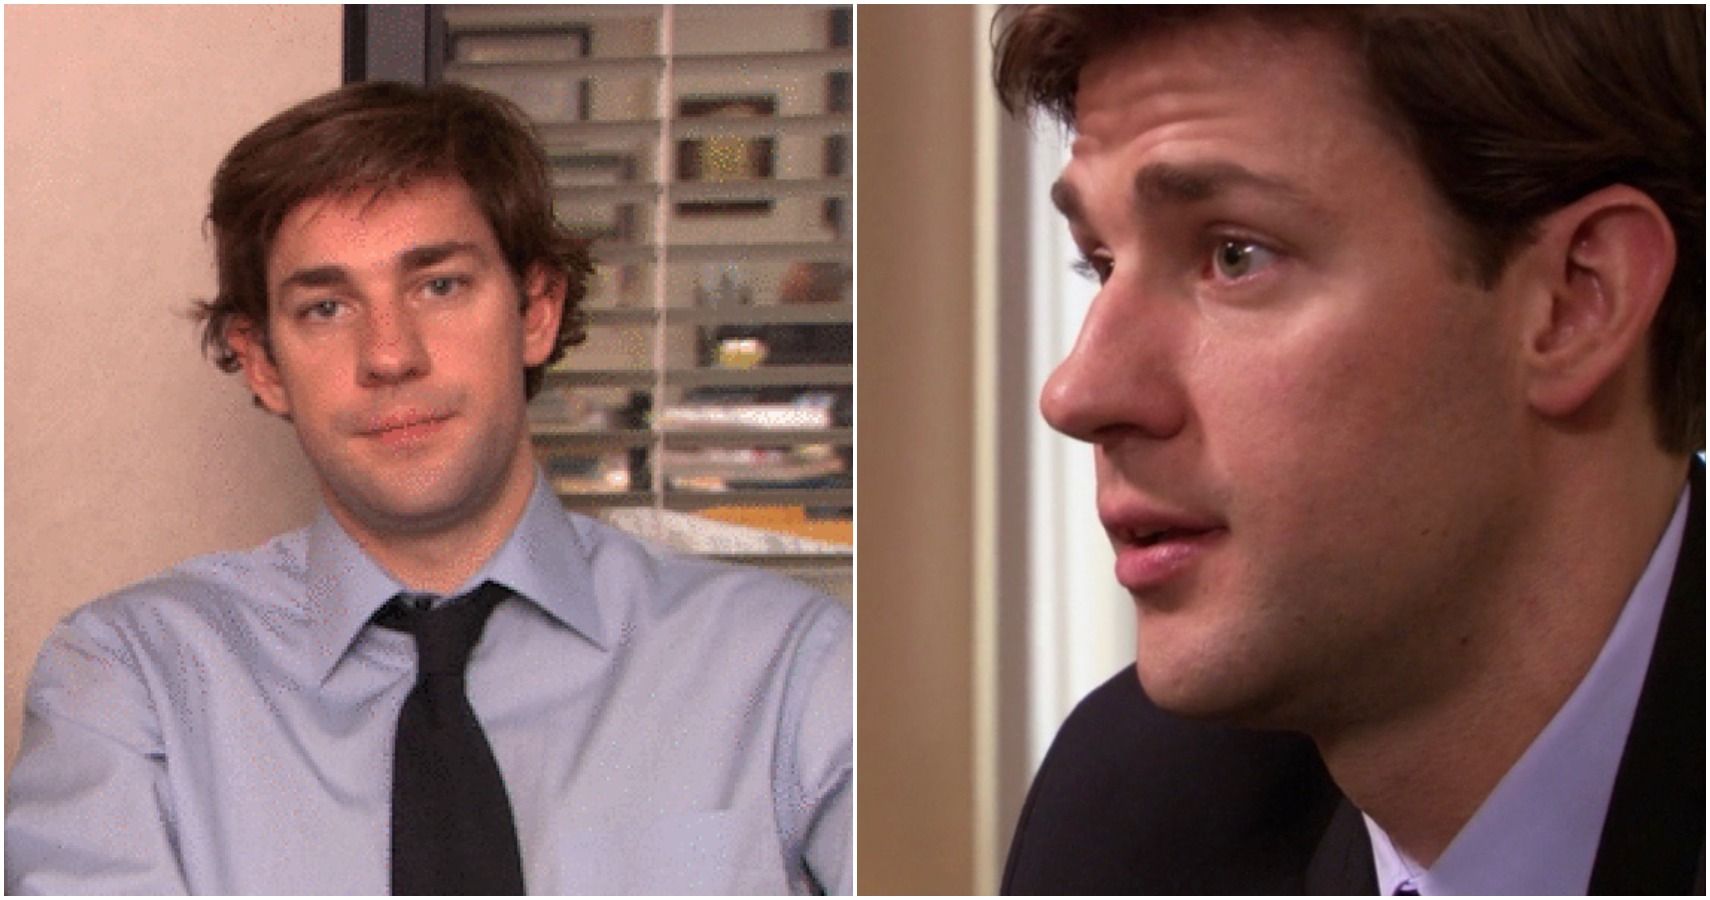 The Office: 10 Things About Jim That Would Never Fly Today